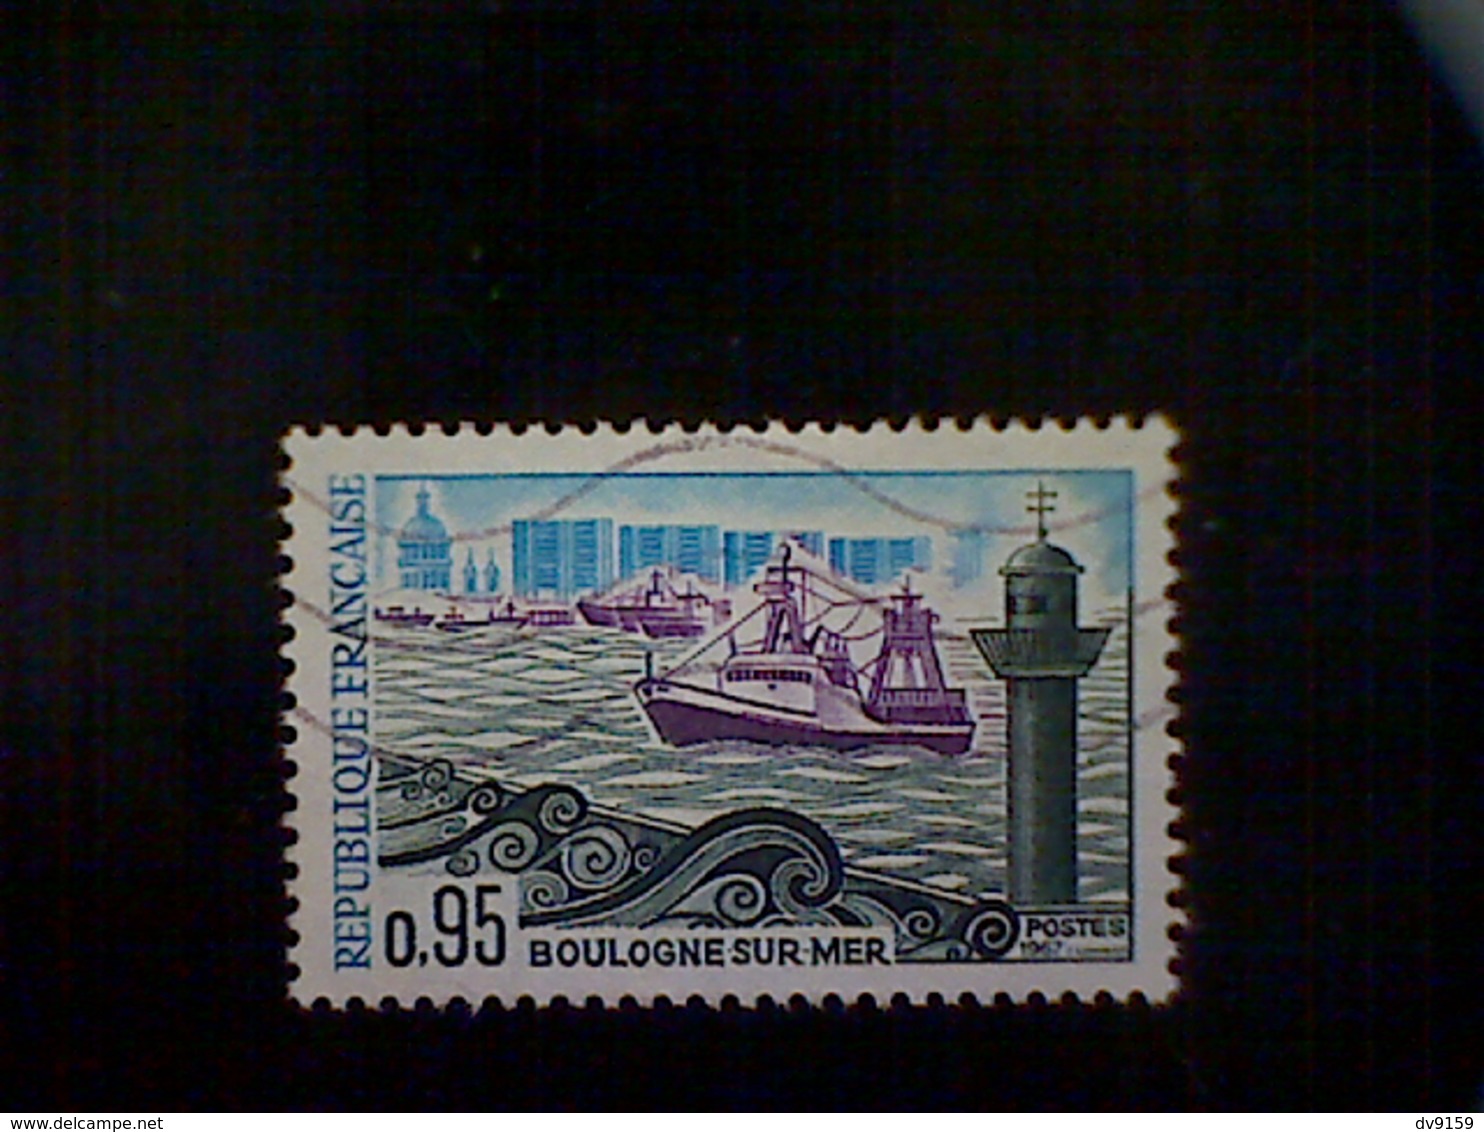 France, Scott #1189, Used, 1967, French Cities: Boulogne Sur Mer, 0.95frs, Blue, Lilac, And Green - Oblitérés